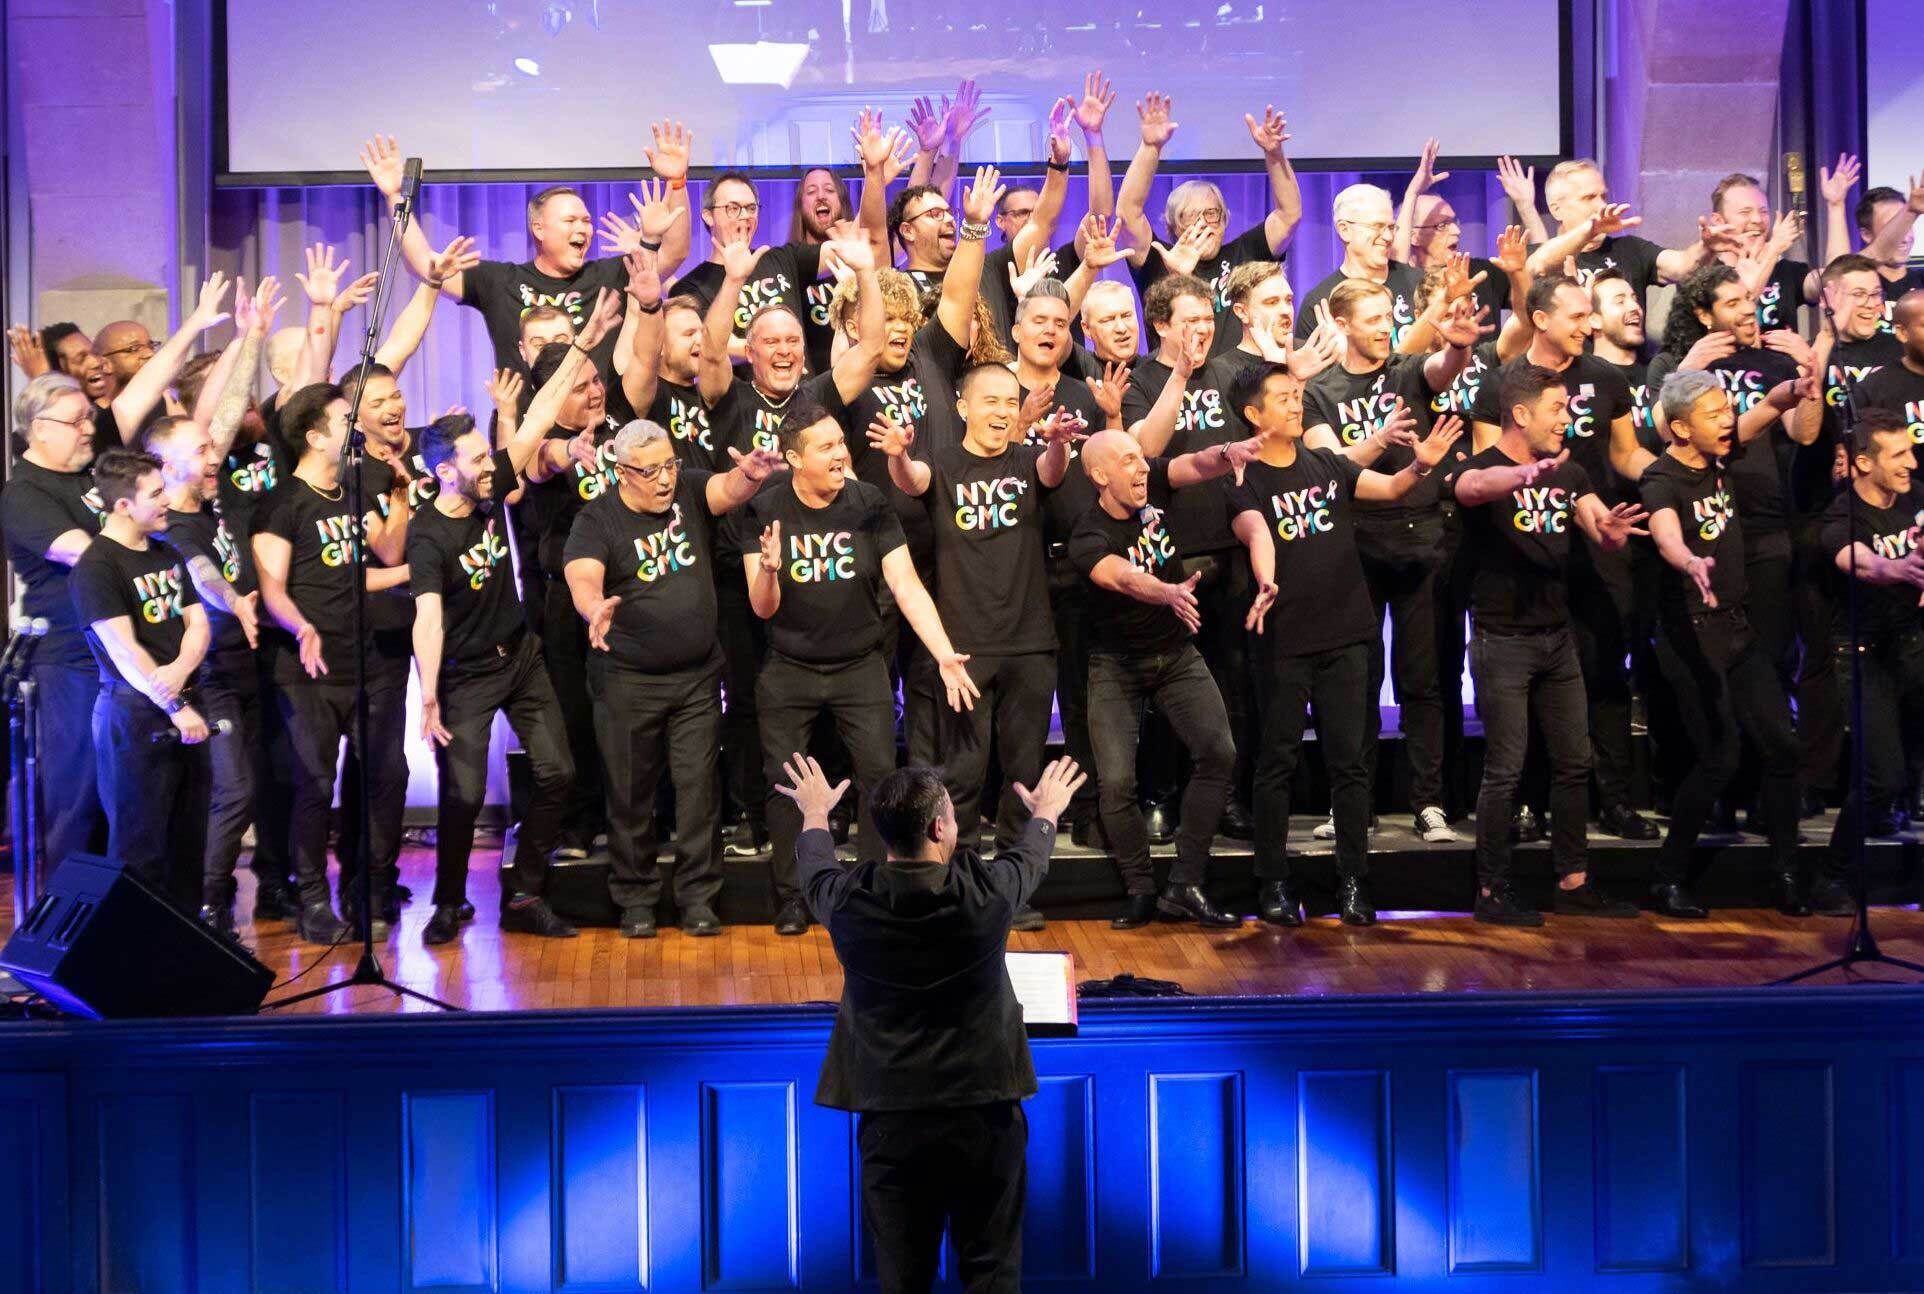 A choir on stage with raised hands, joyfully singing, led by a conductor in front.